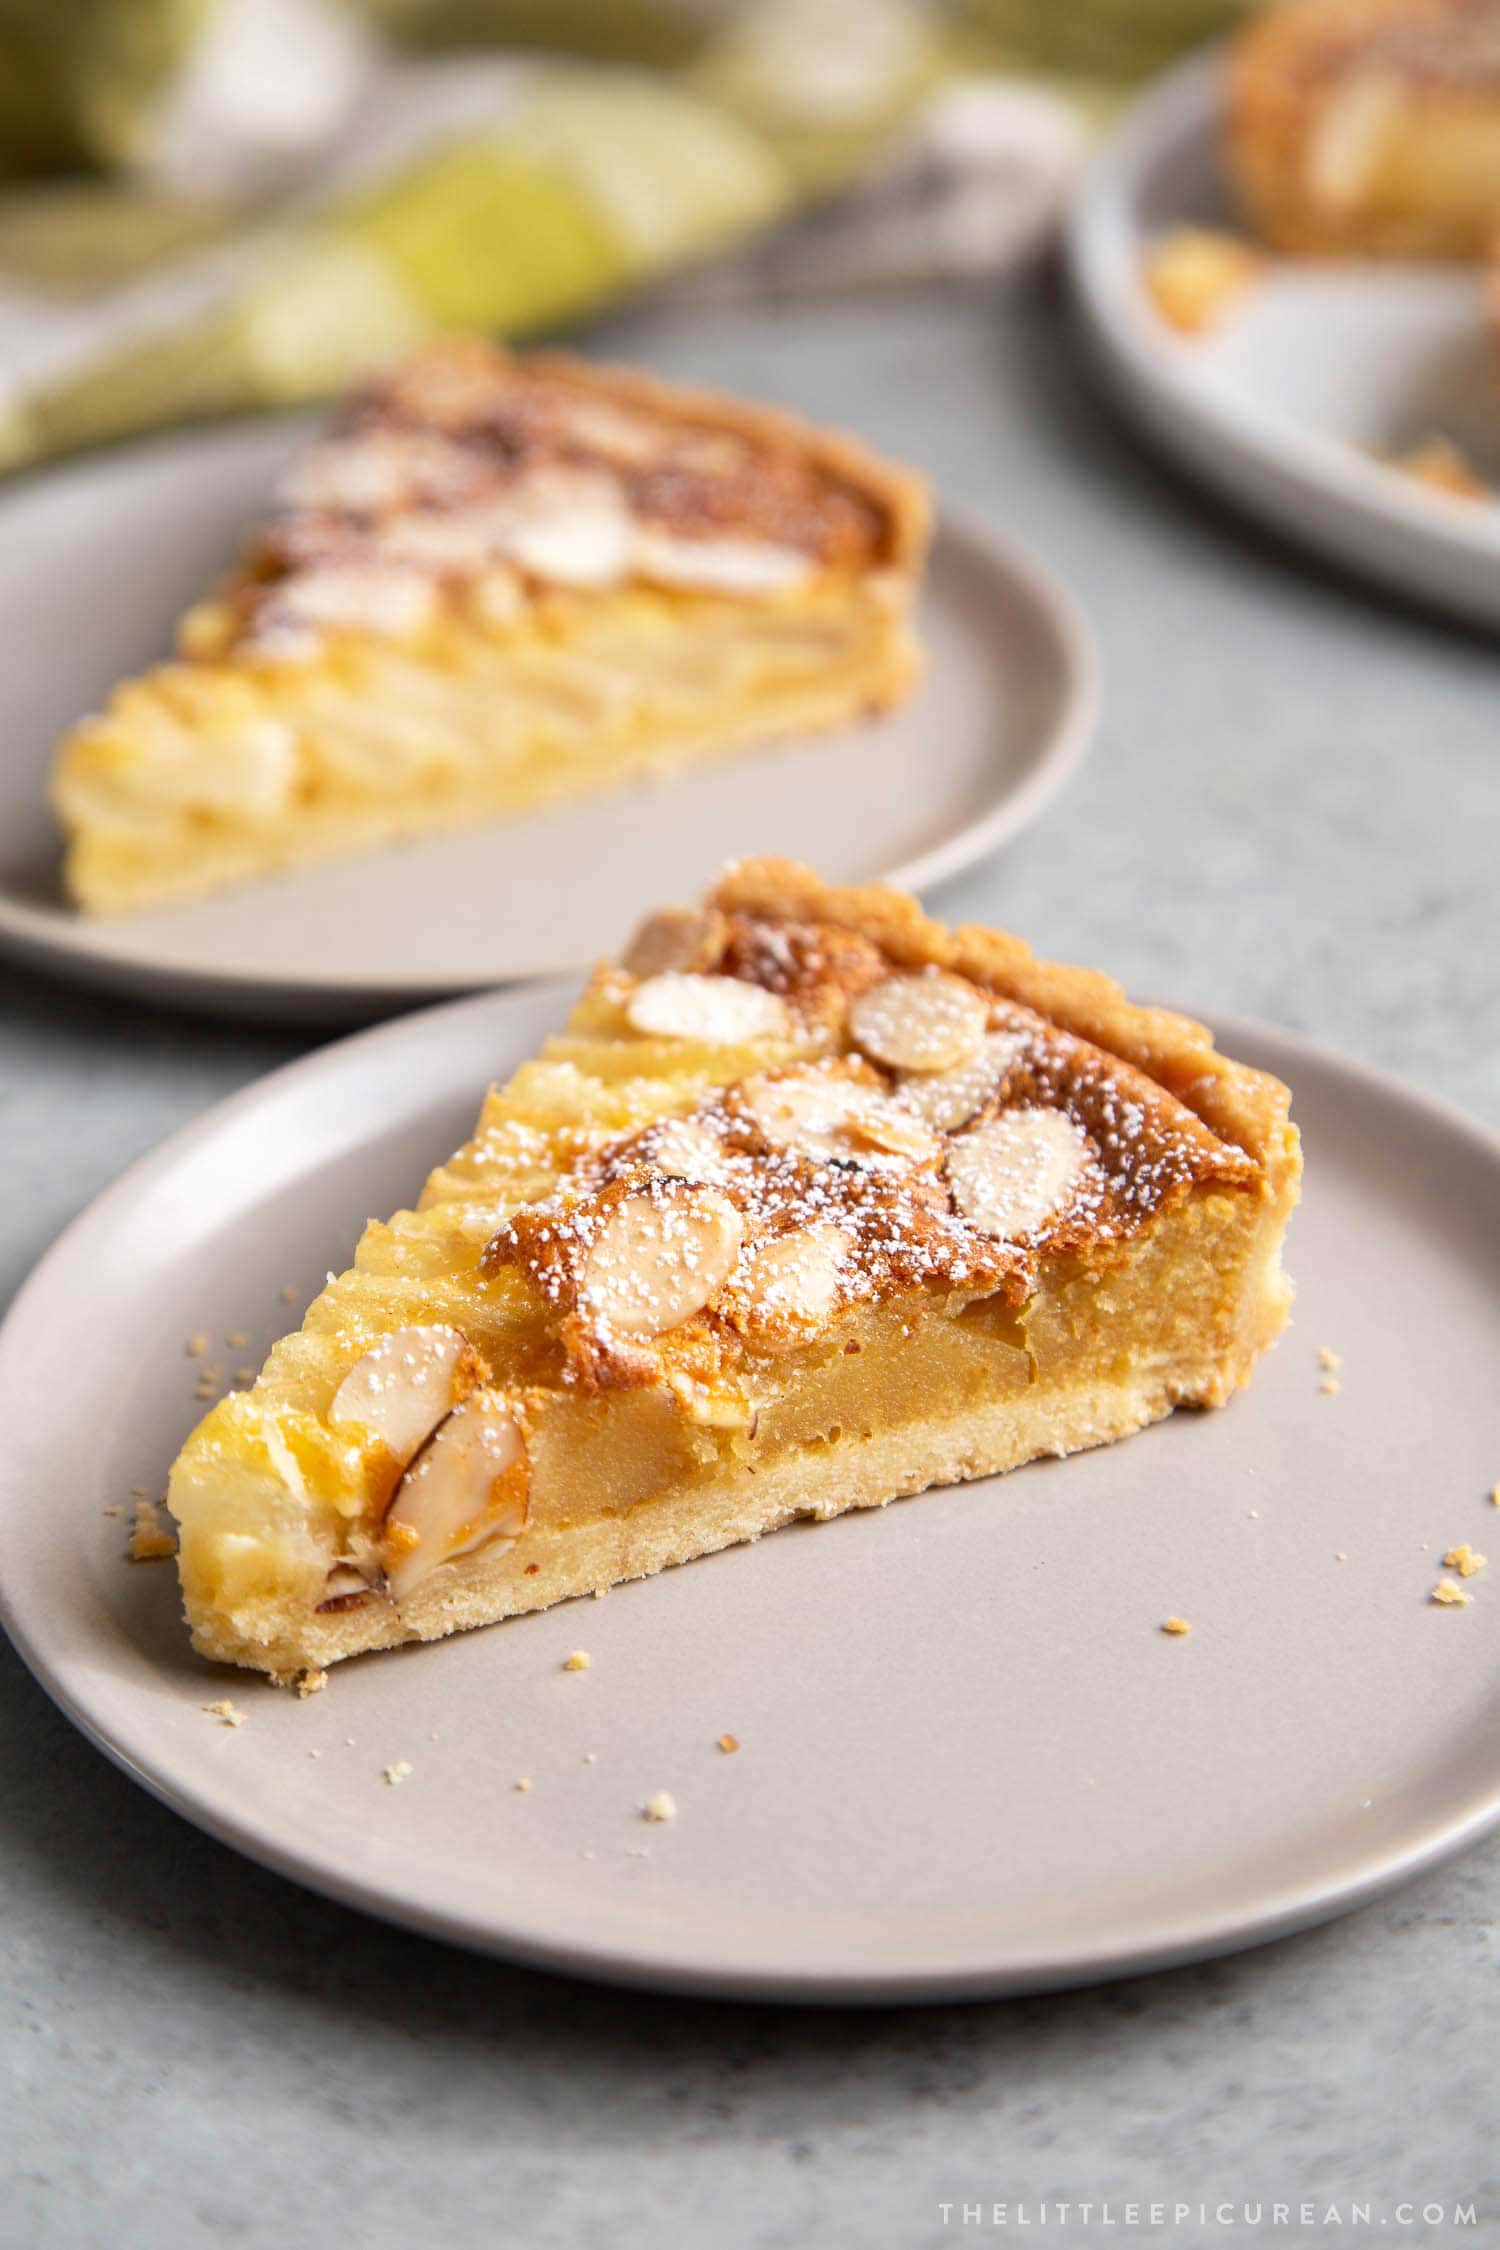 Pear Frangipane Tart Slice. Buttery shortbread crust baked with almond frangipane filling and pears.